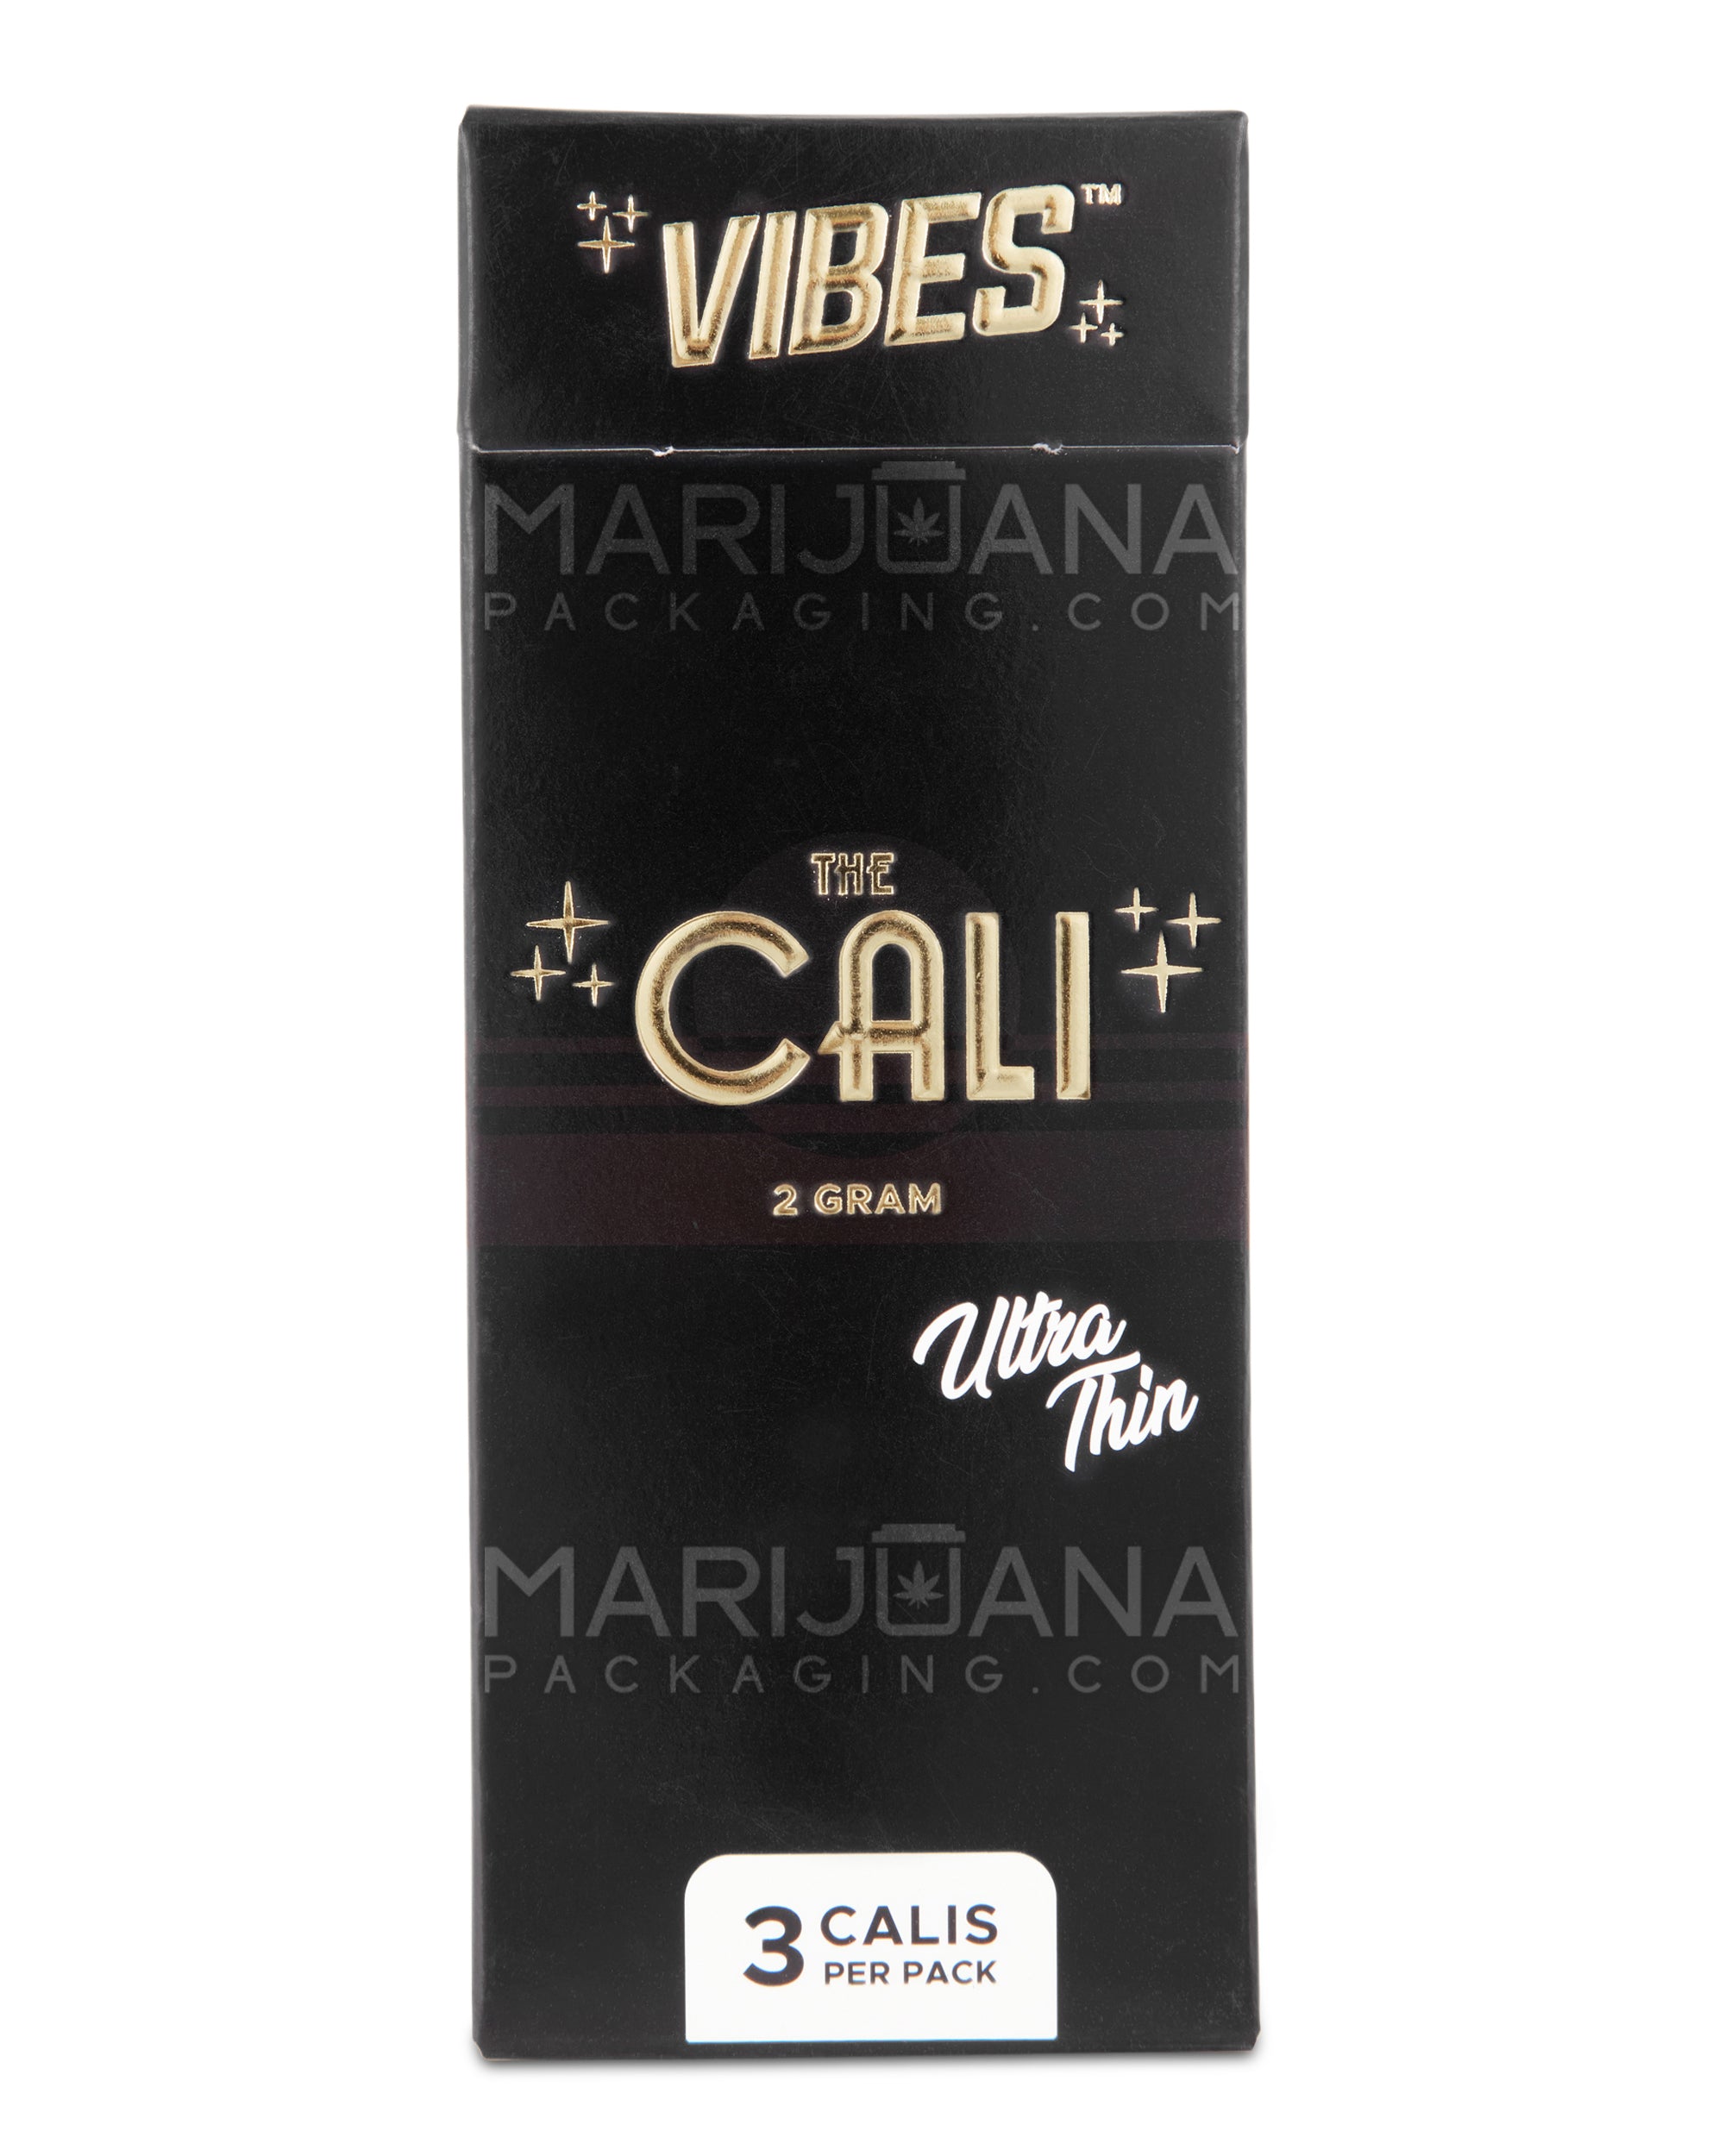 VIBES | 'Retail Display' The Cali 2 Gram Pre-Rolled Cones | 110mm - Ultra Thin Paper - 24 Count - 3